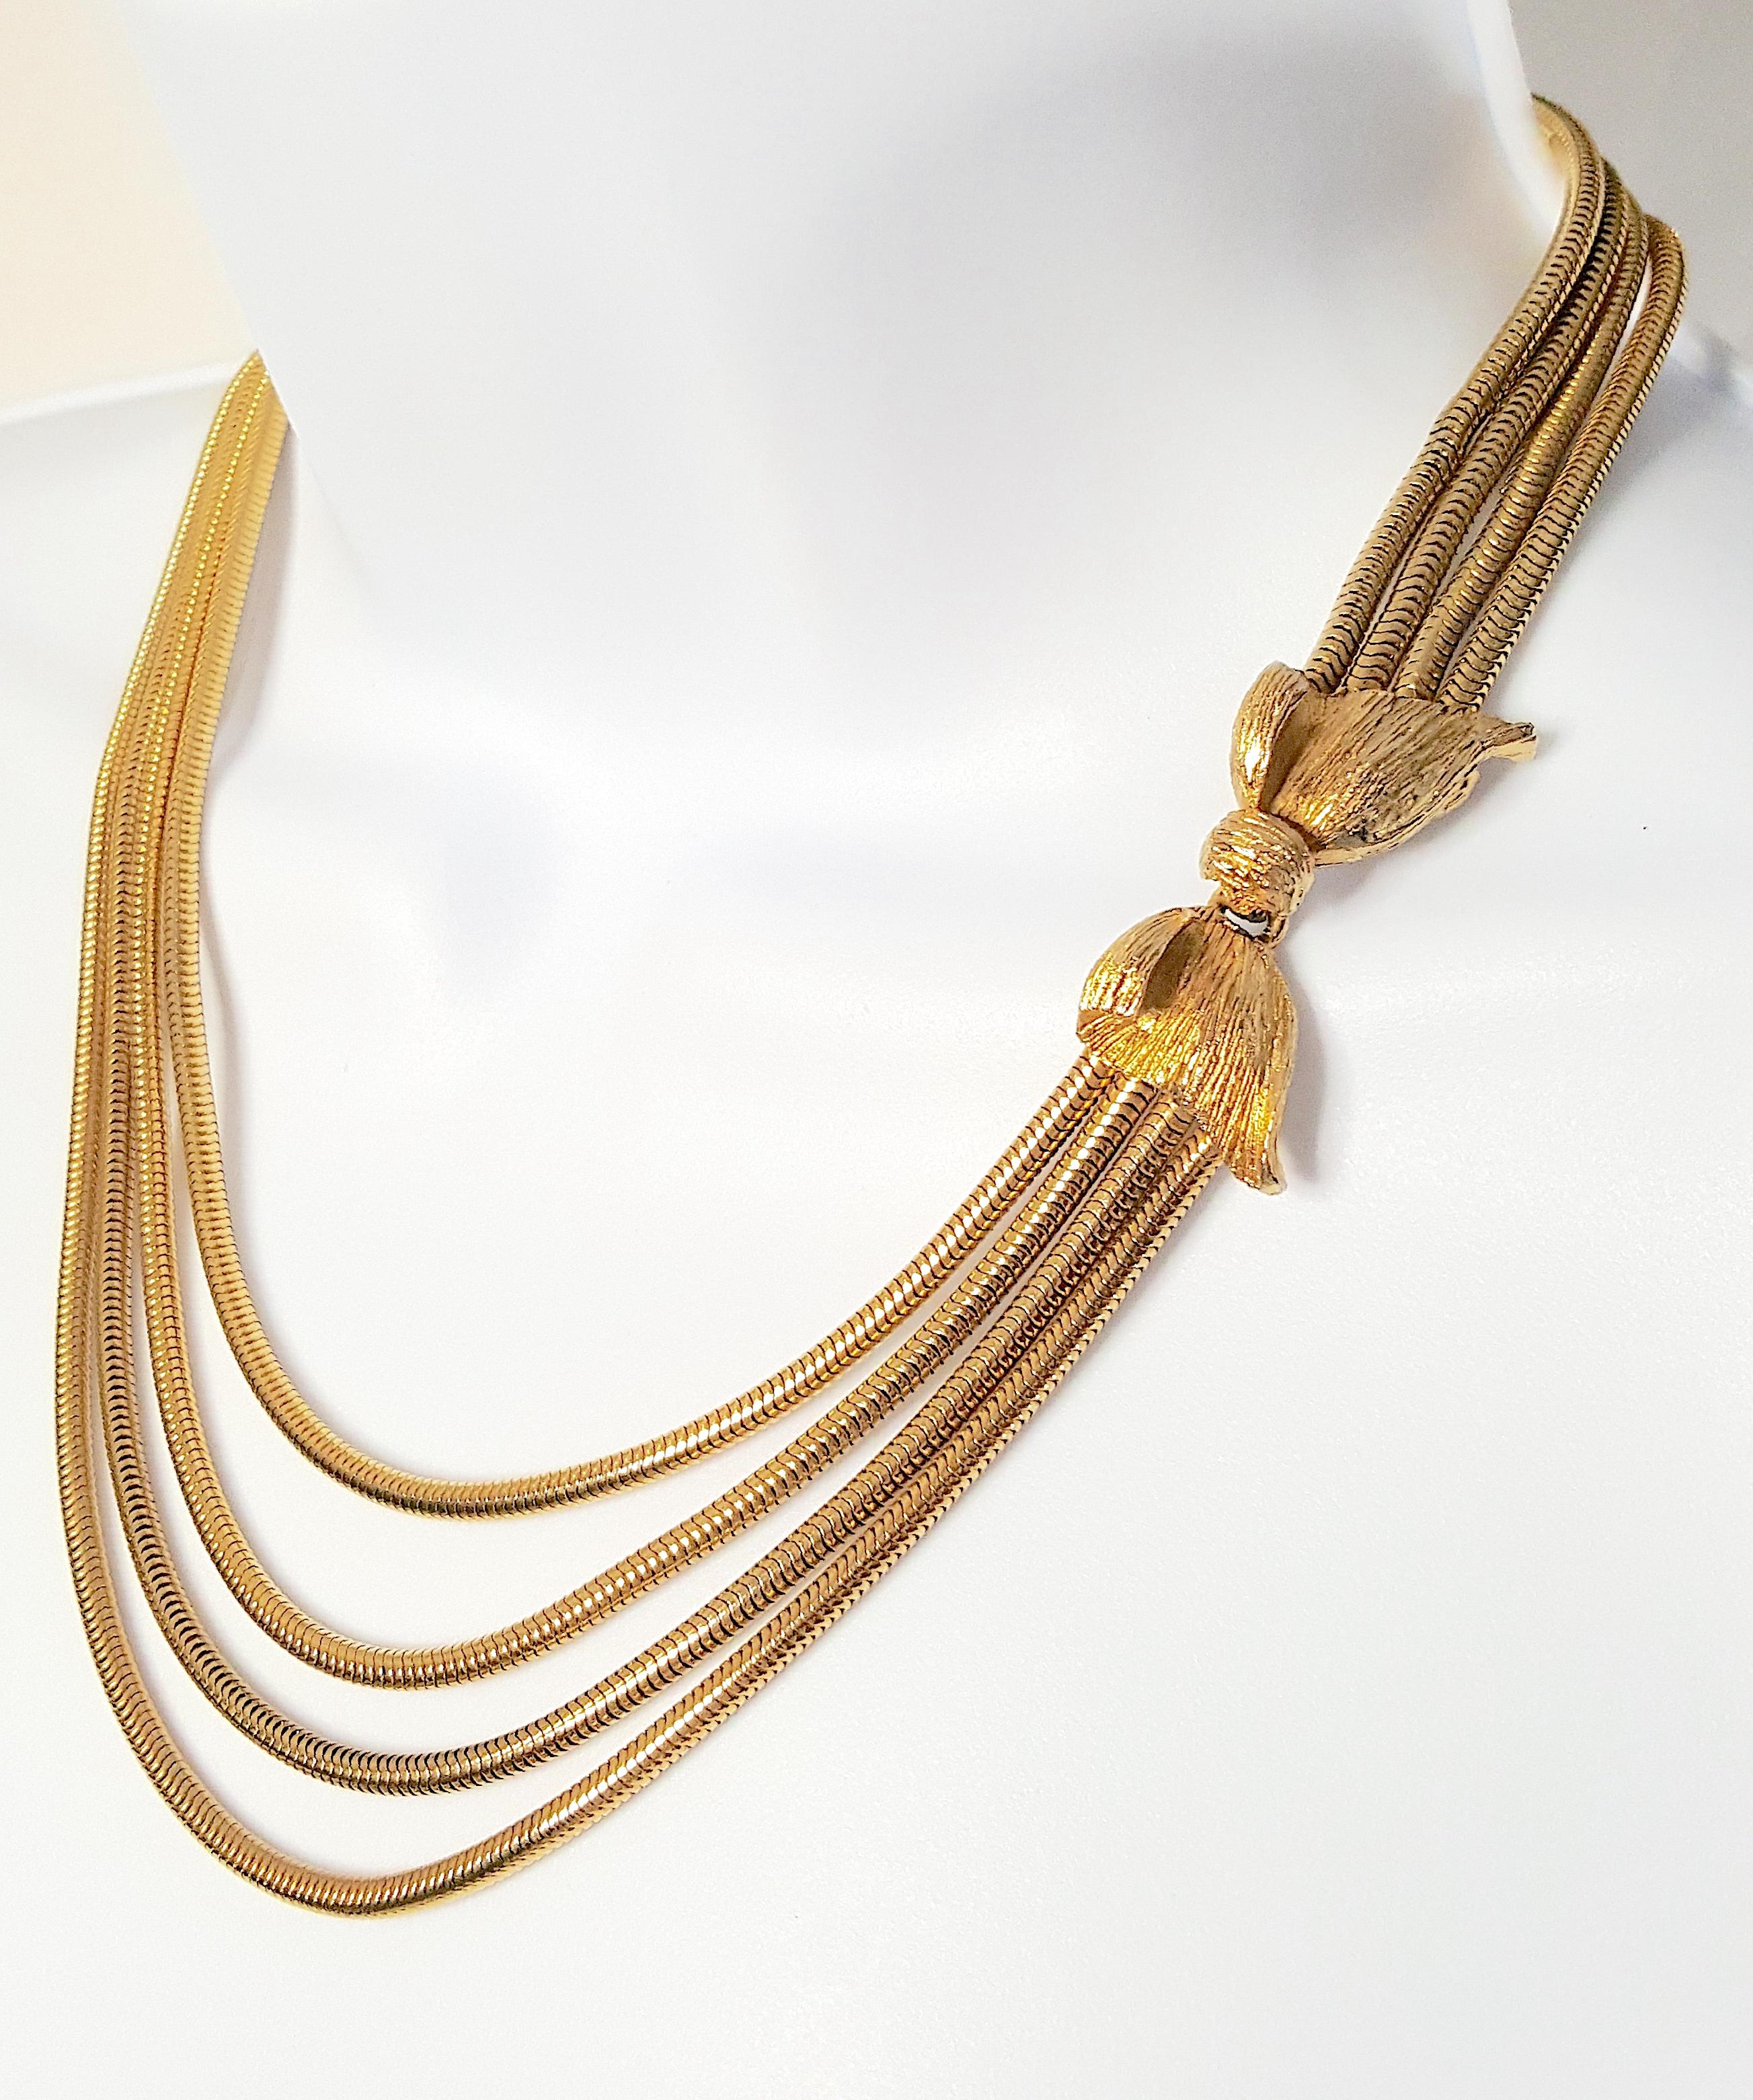 This mid-century shiny yellow-gold-plated snake-chain multi-strand necklace features a sculptural finely-textured gilt-metal bow that is positioned to rest on the upper left chest to function as a hook-and-eye clasp. Among the four graduated chains